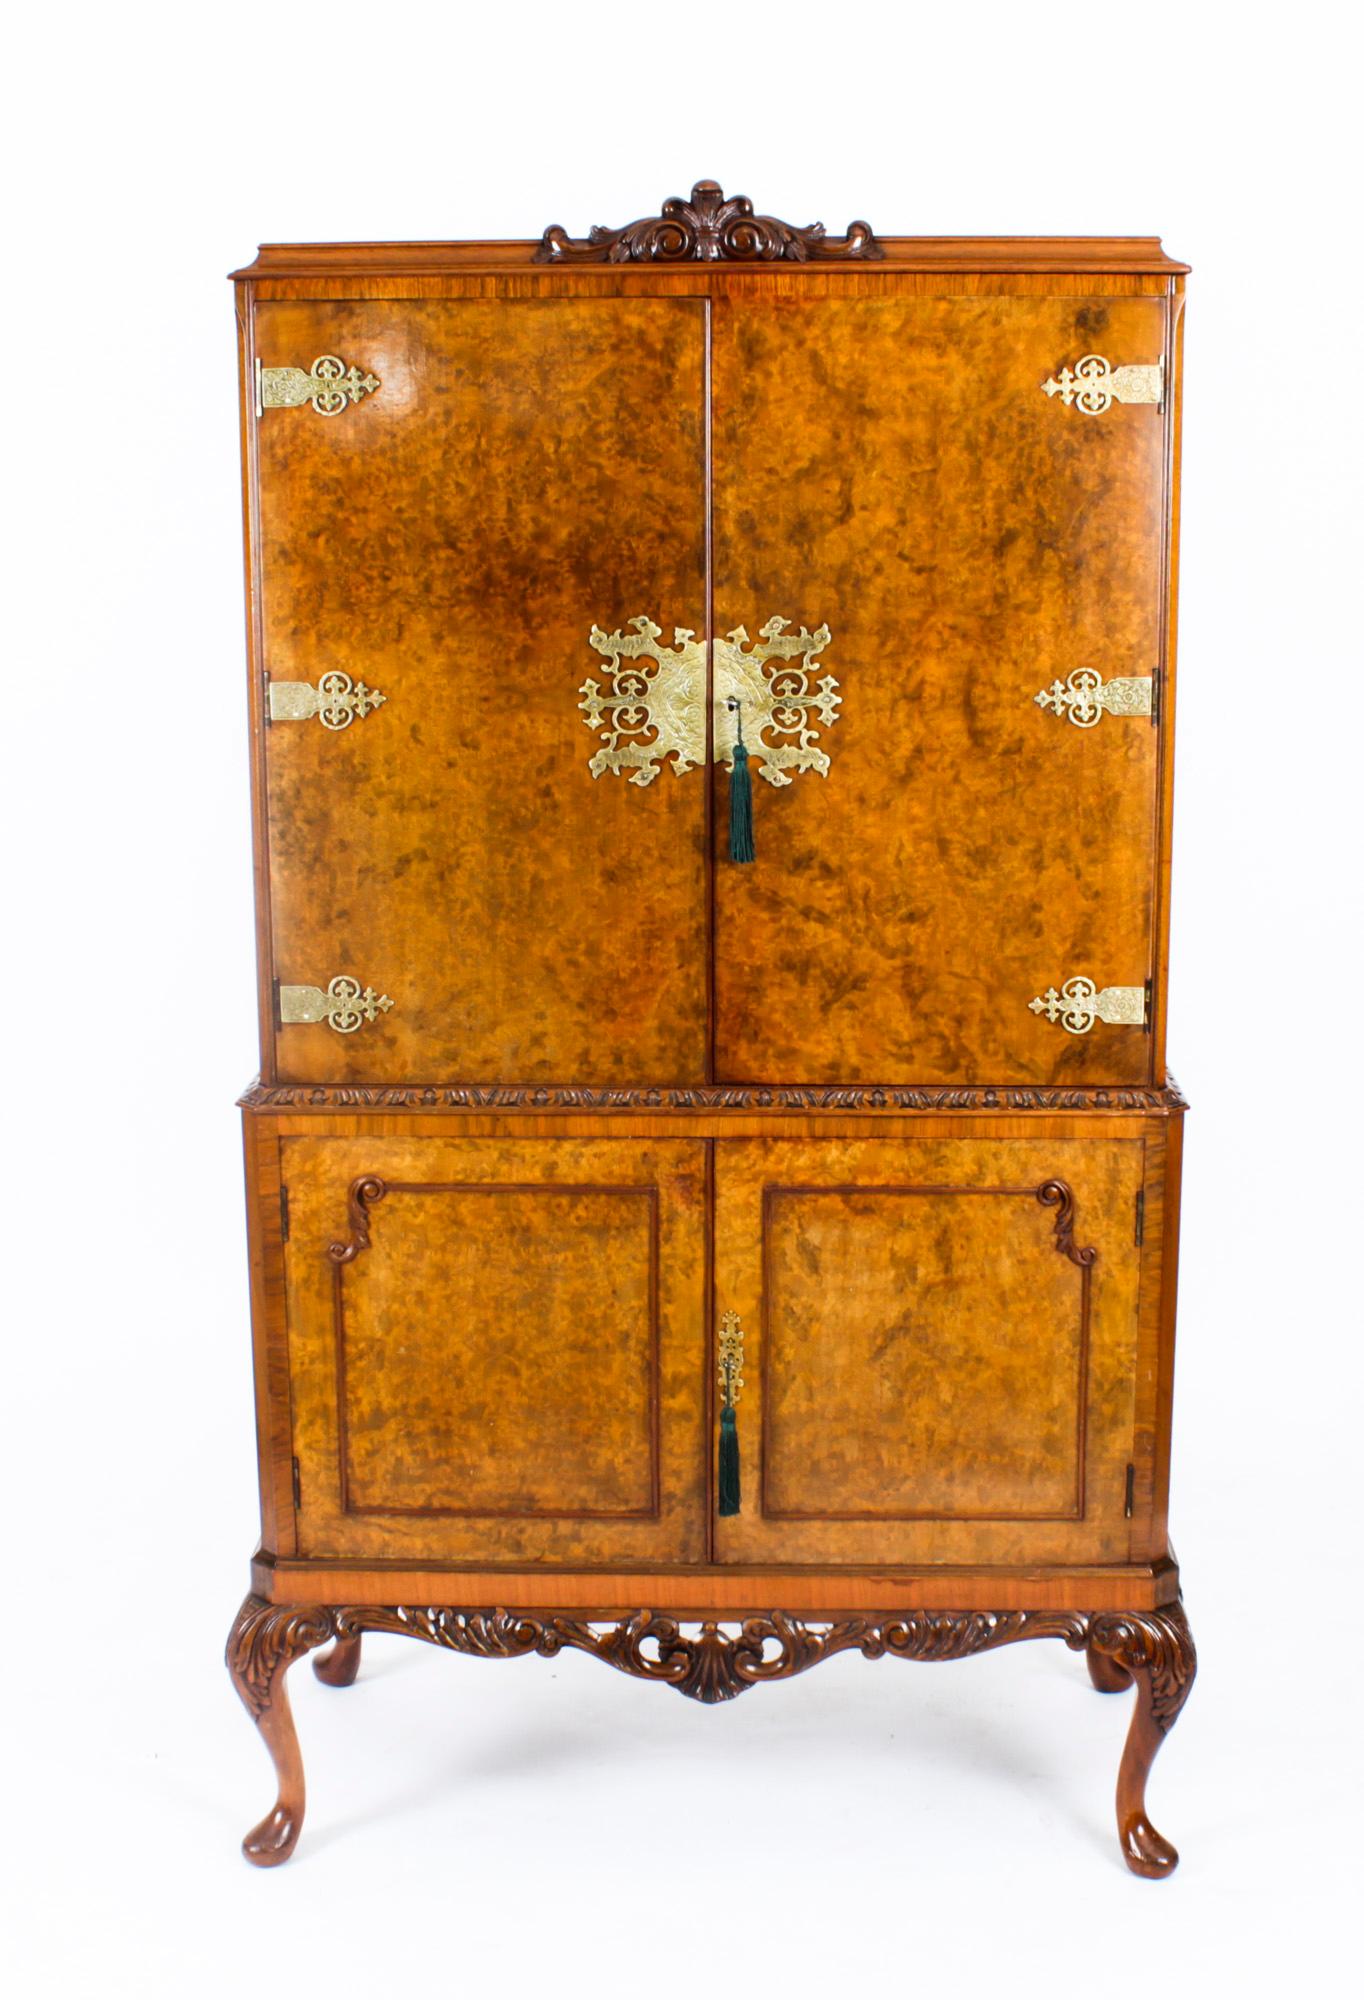 This is a fantastic vintage Epstein style burr walnut cocktail cabinet with fitted and mirrored interior, ormolu mounts, dating from the mid 20th Century.

The upper part comprises a pair of doors that open to reveal a striking fitted mirrored and